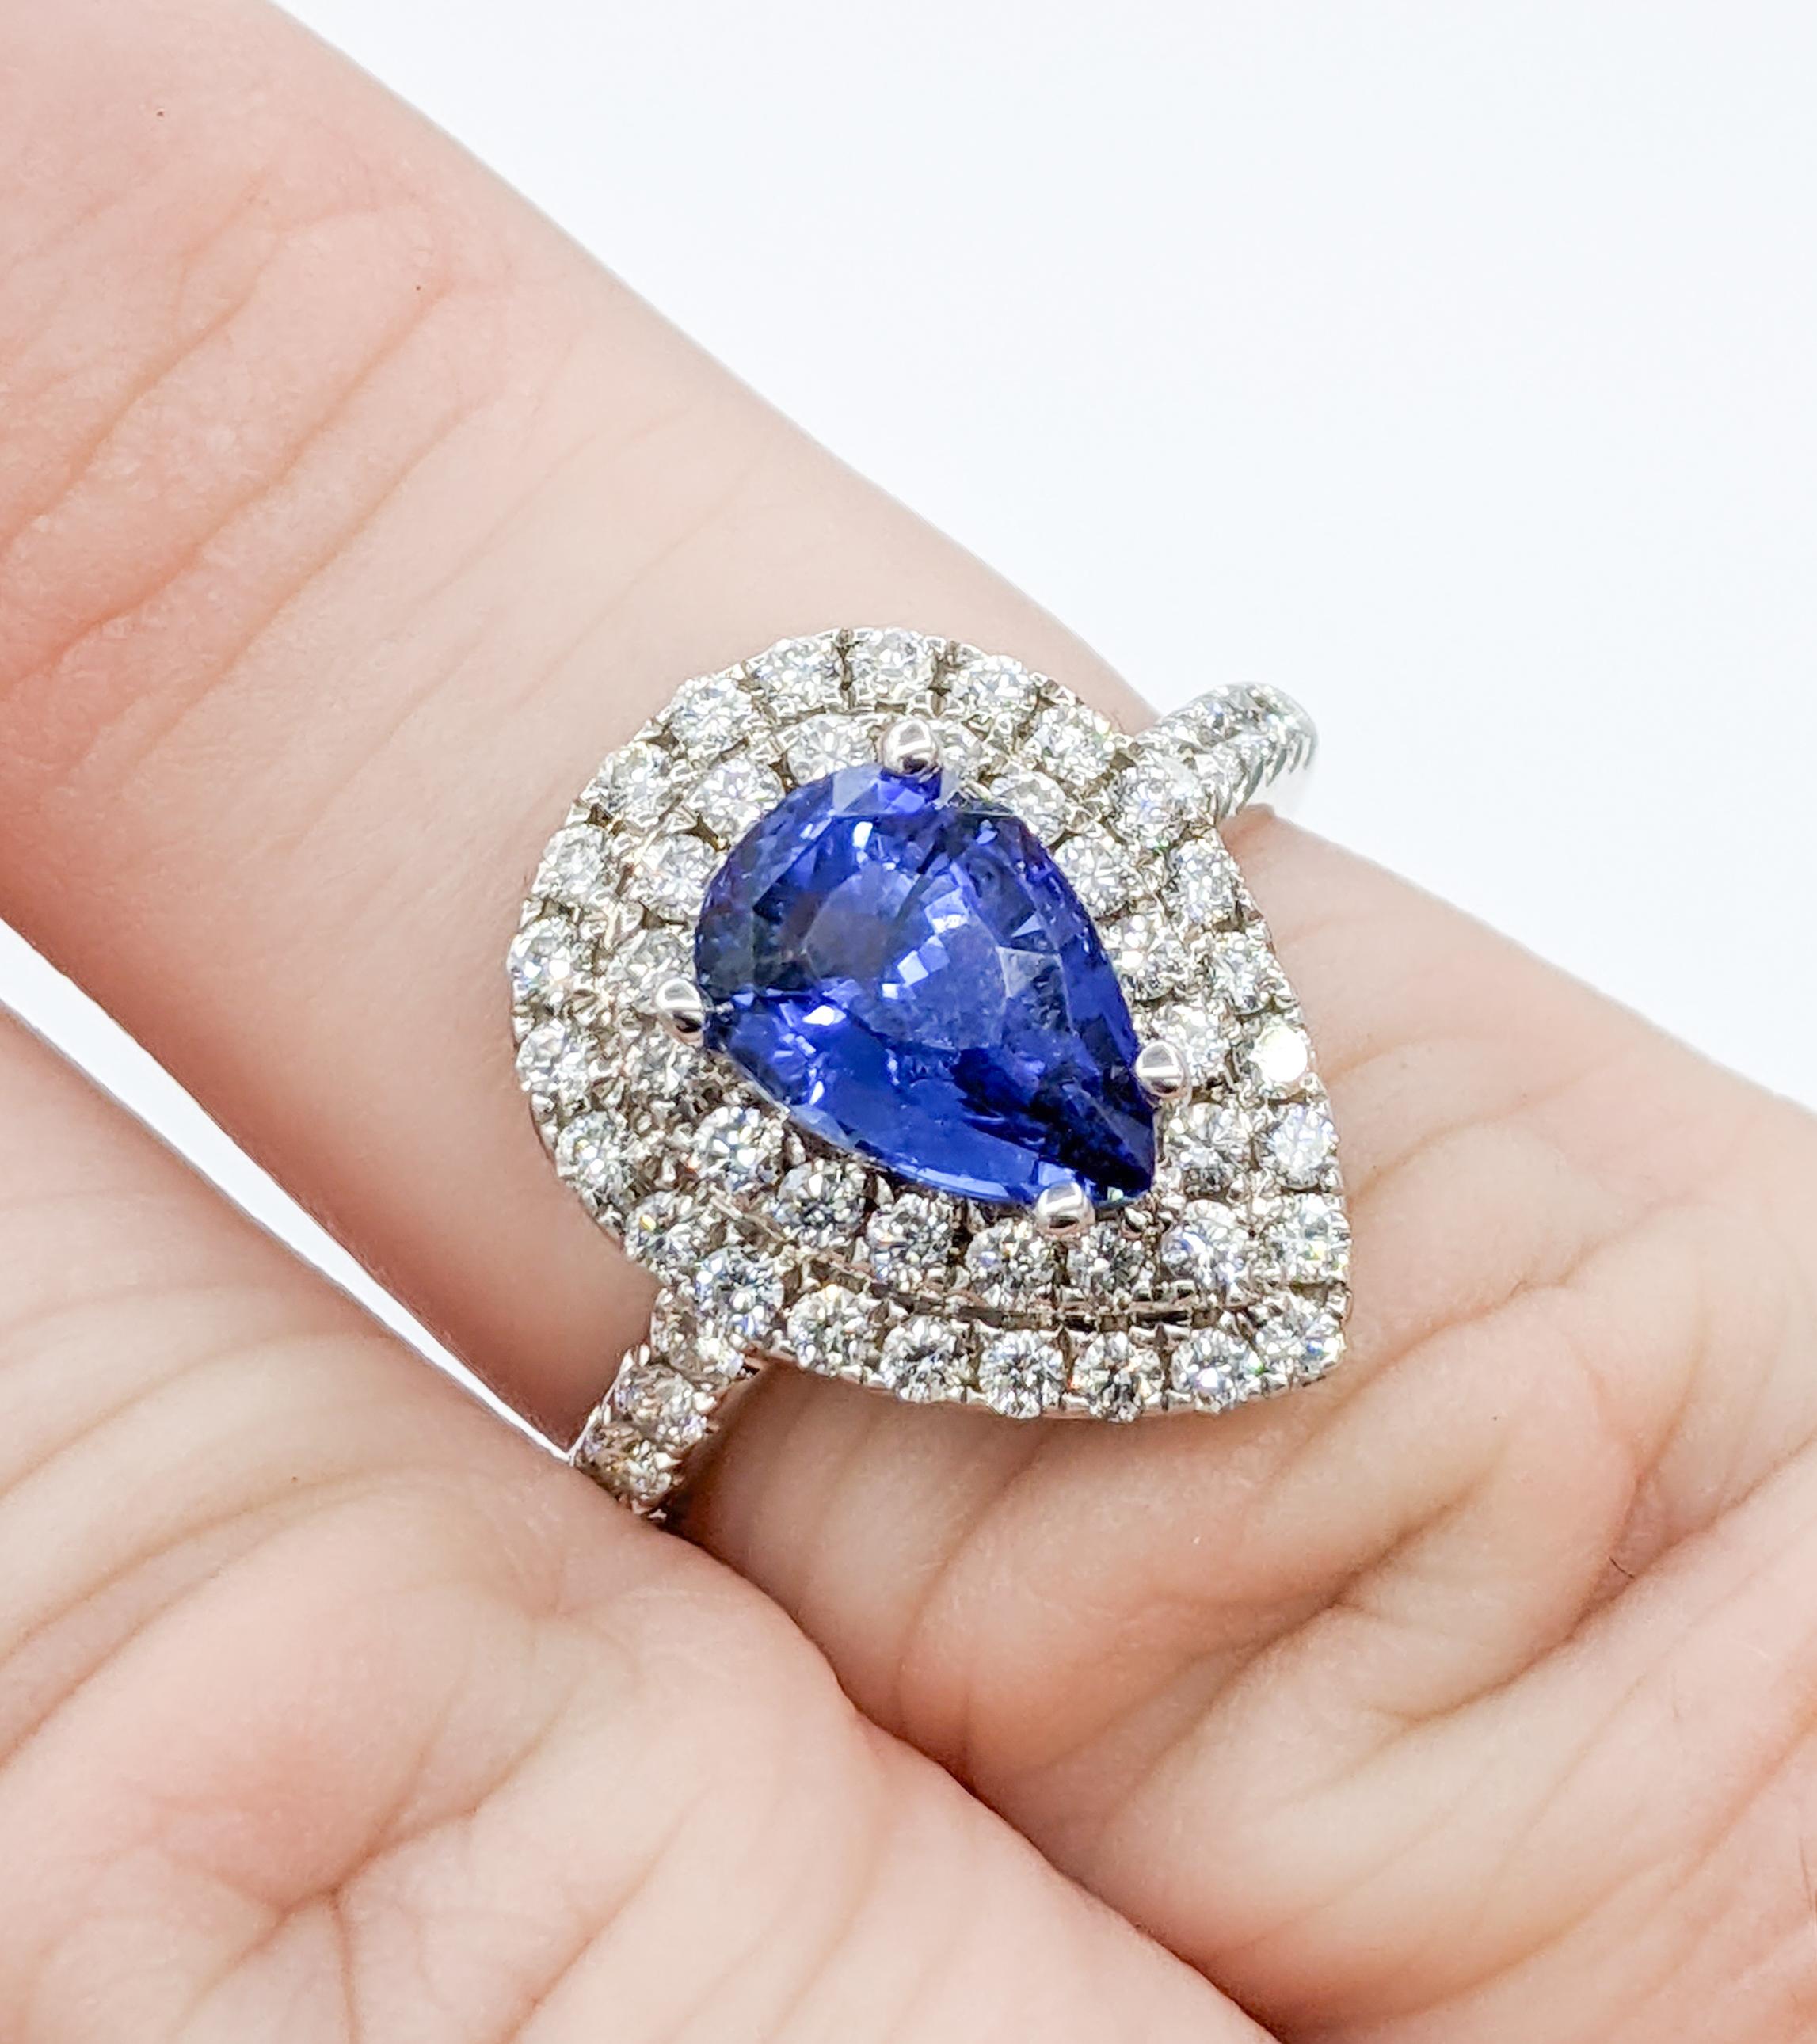 Contemporary Stunning 2.00ct Sapphire & Diamond Cocktail Ring - 18K White Gold For Sale